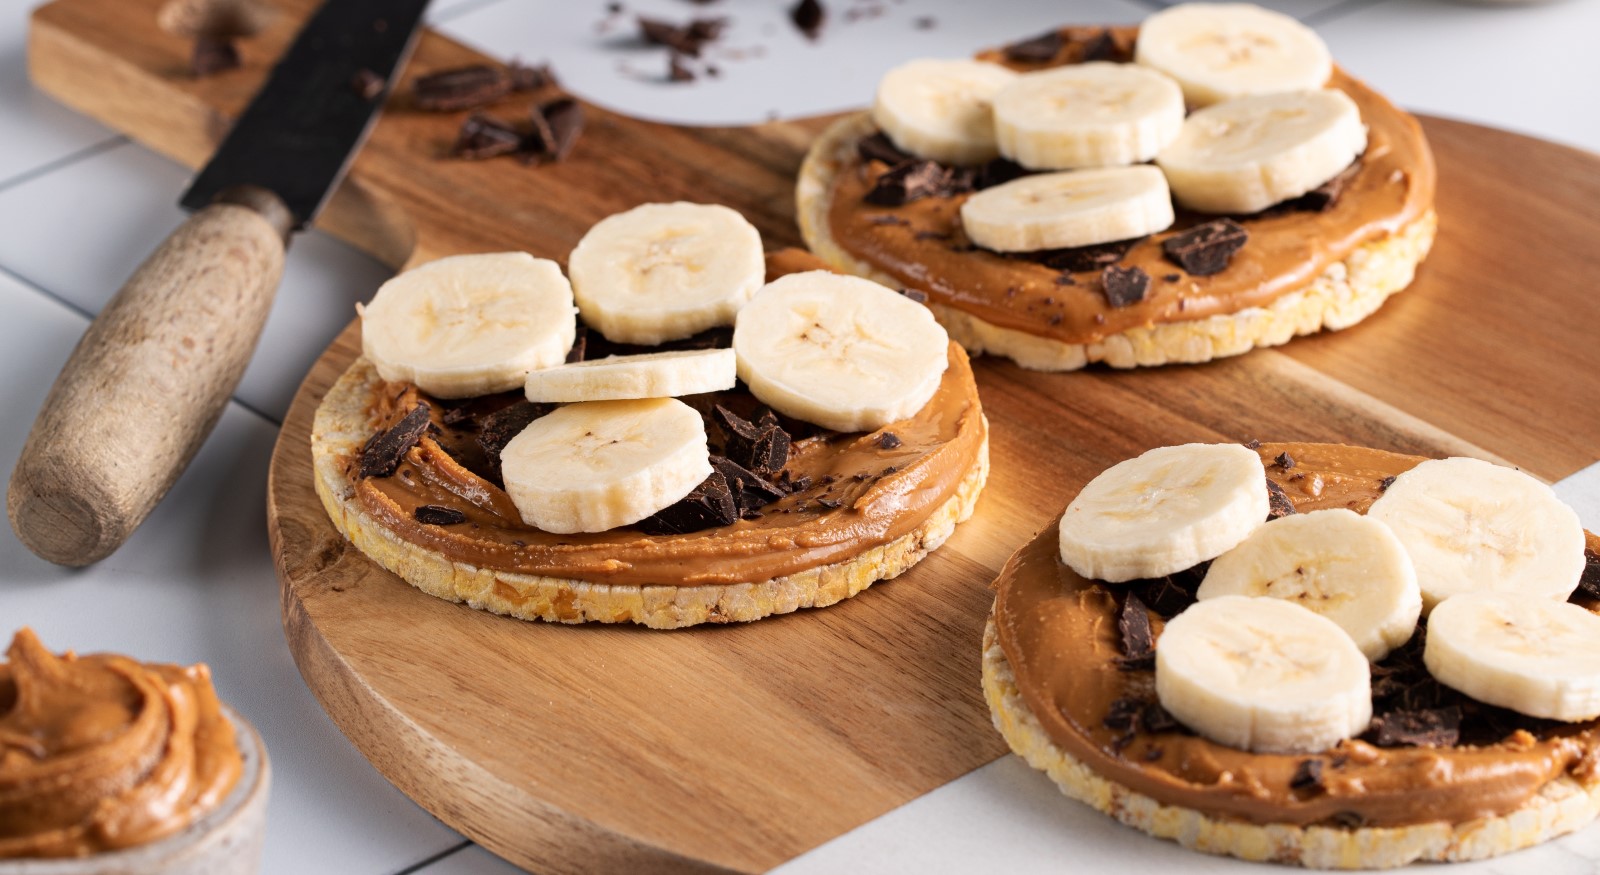 Chocolate, peanut butter & banana on Corn Thins slices